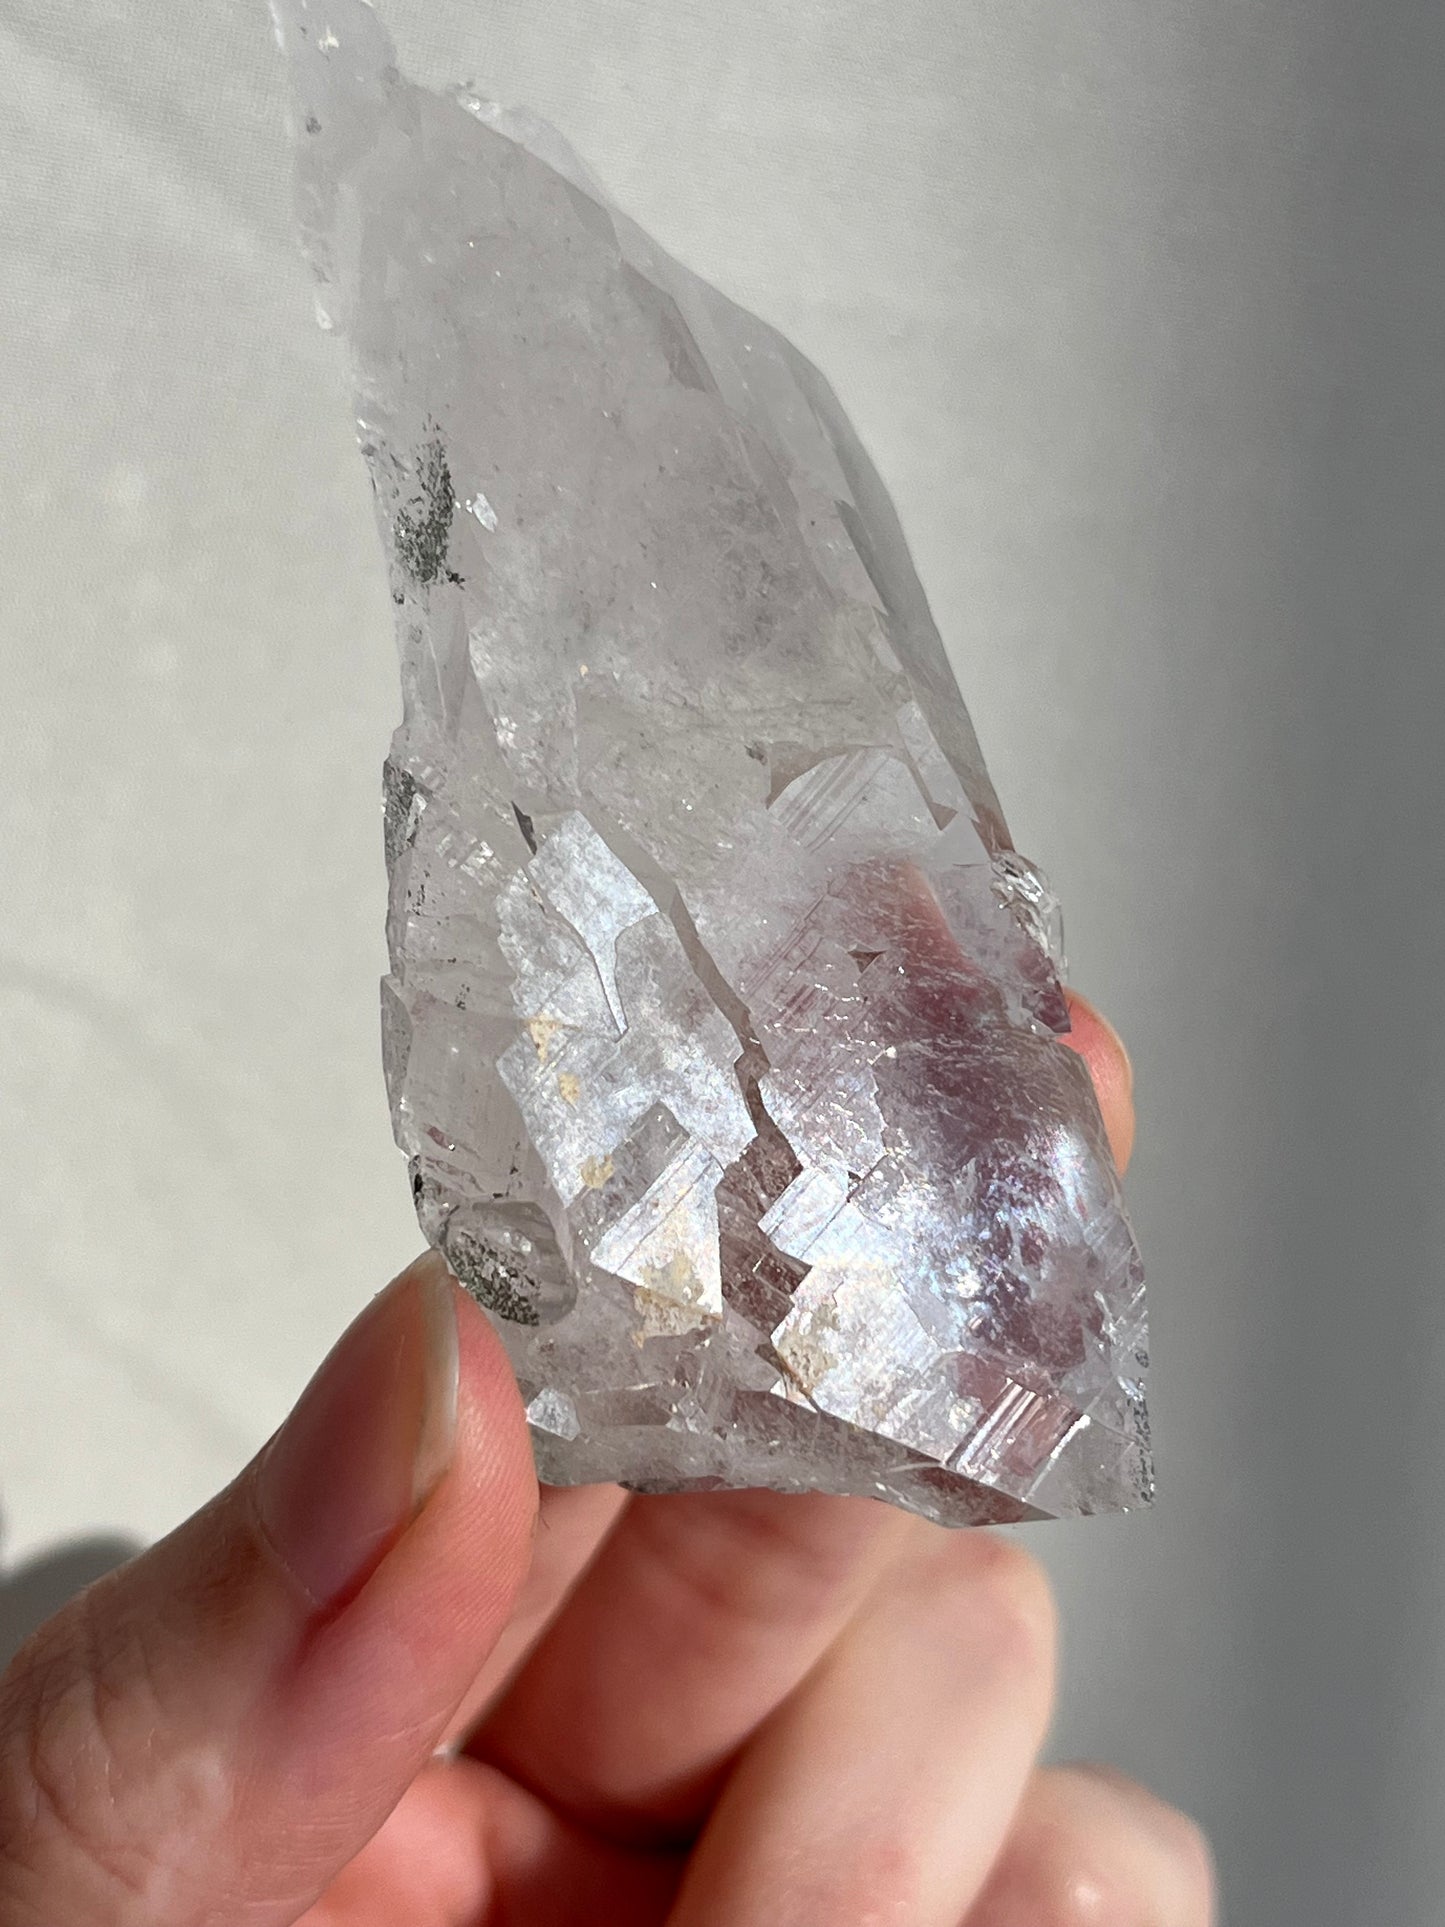 Etched Elestial Himalayan Quartz w/Raised Record Keeper Features, Natural Aura Coating & Sparkly Anatase #7